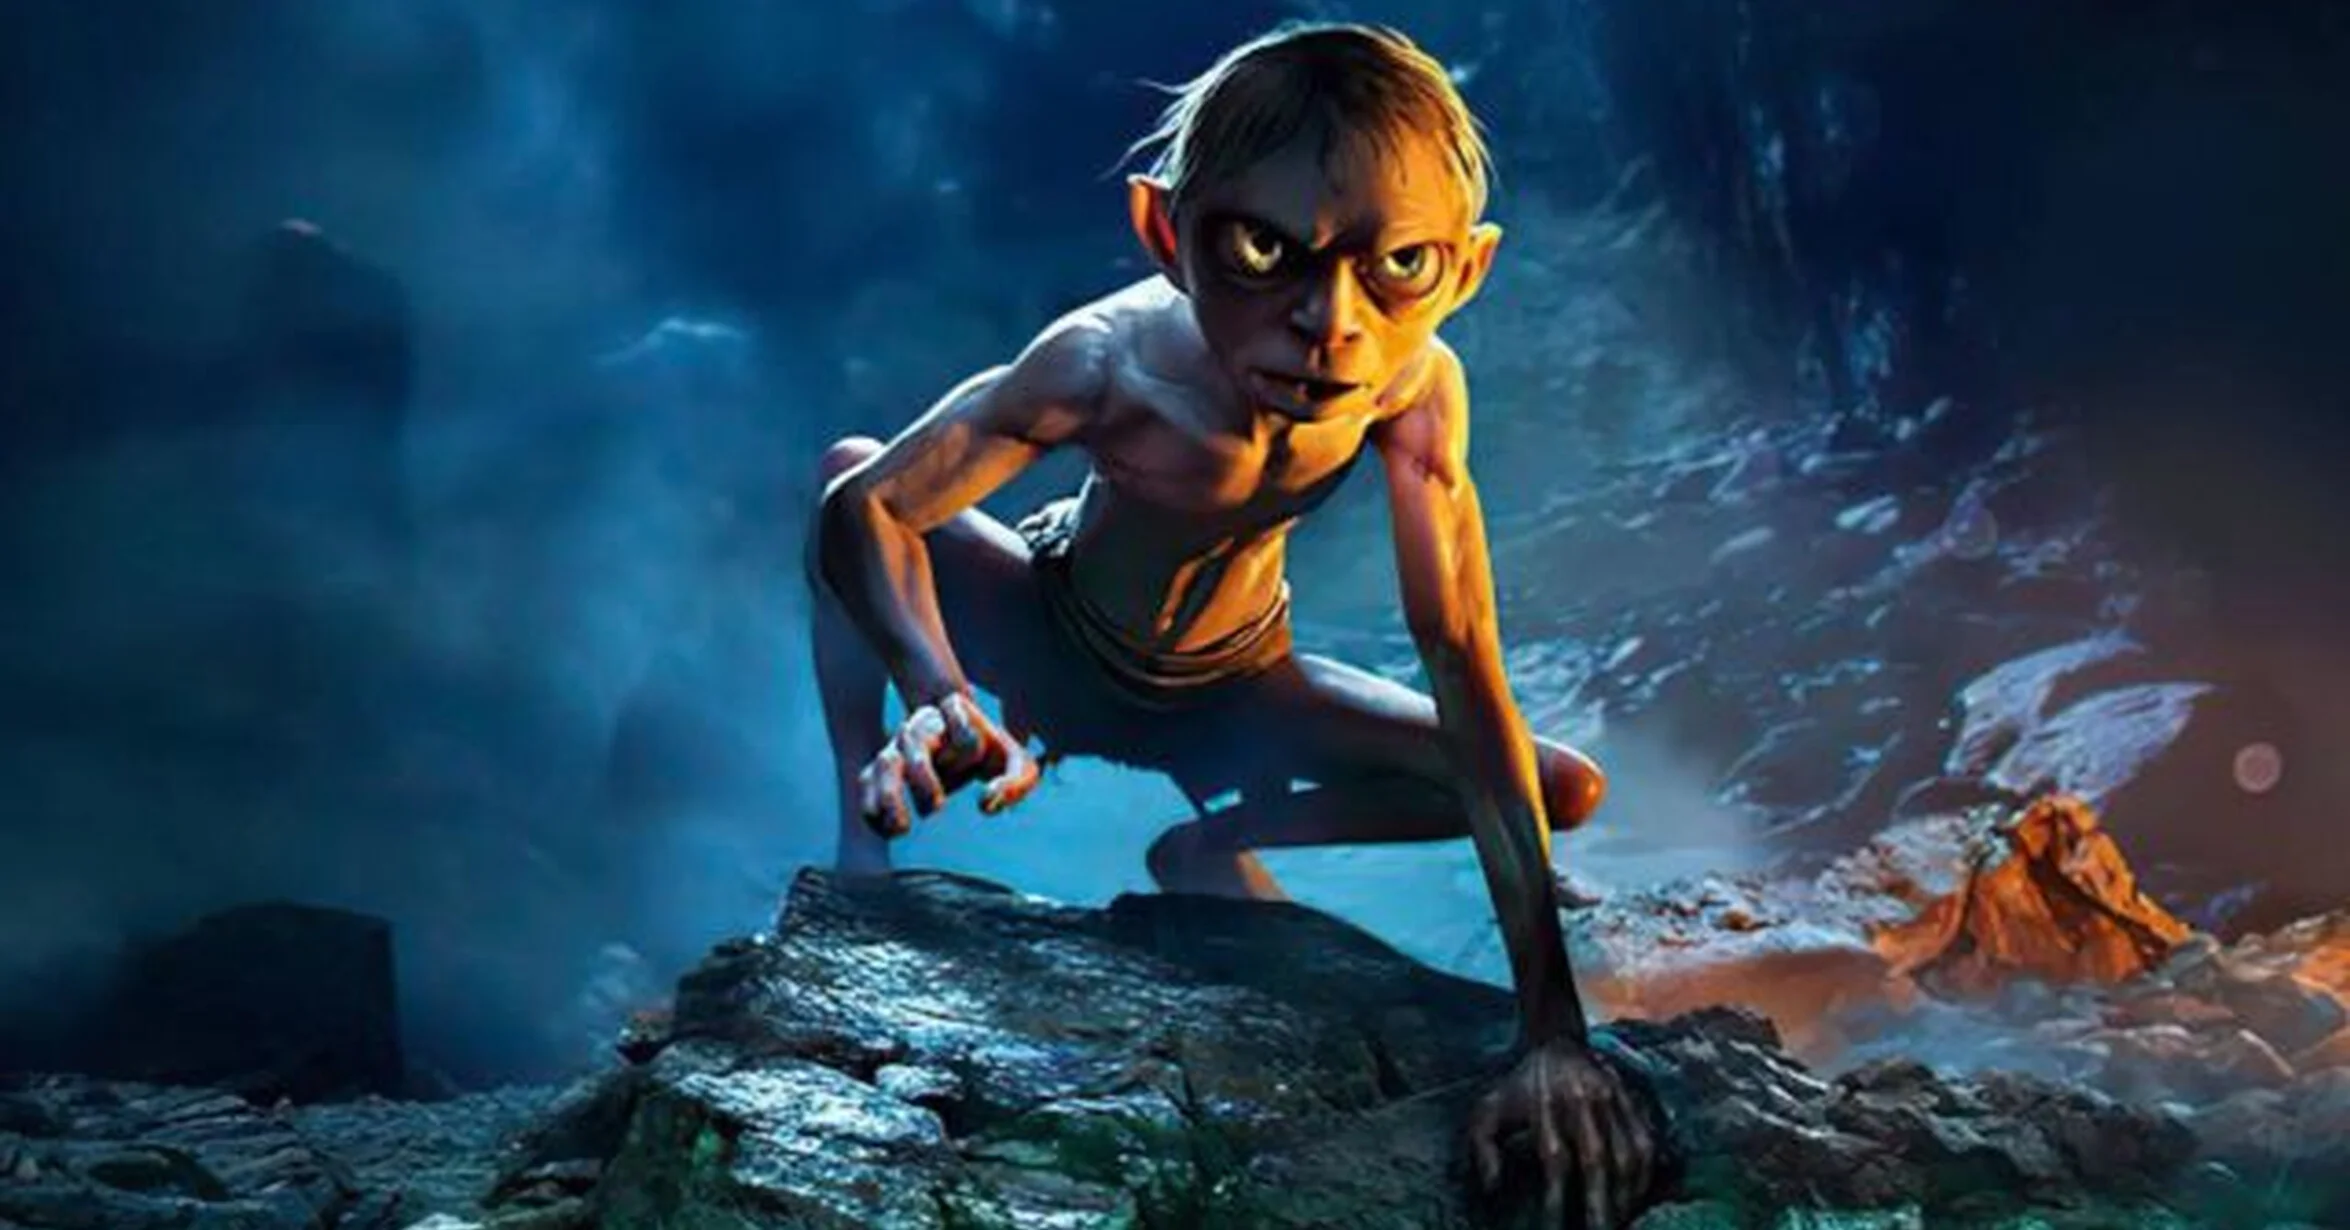 The game about Gollum from the "Lord of the Rings" is completely finished